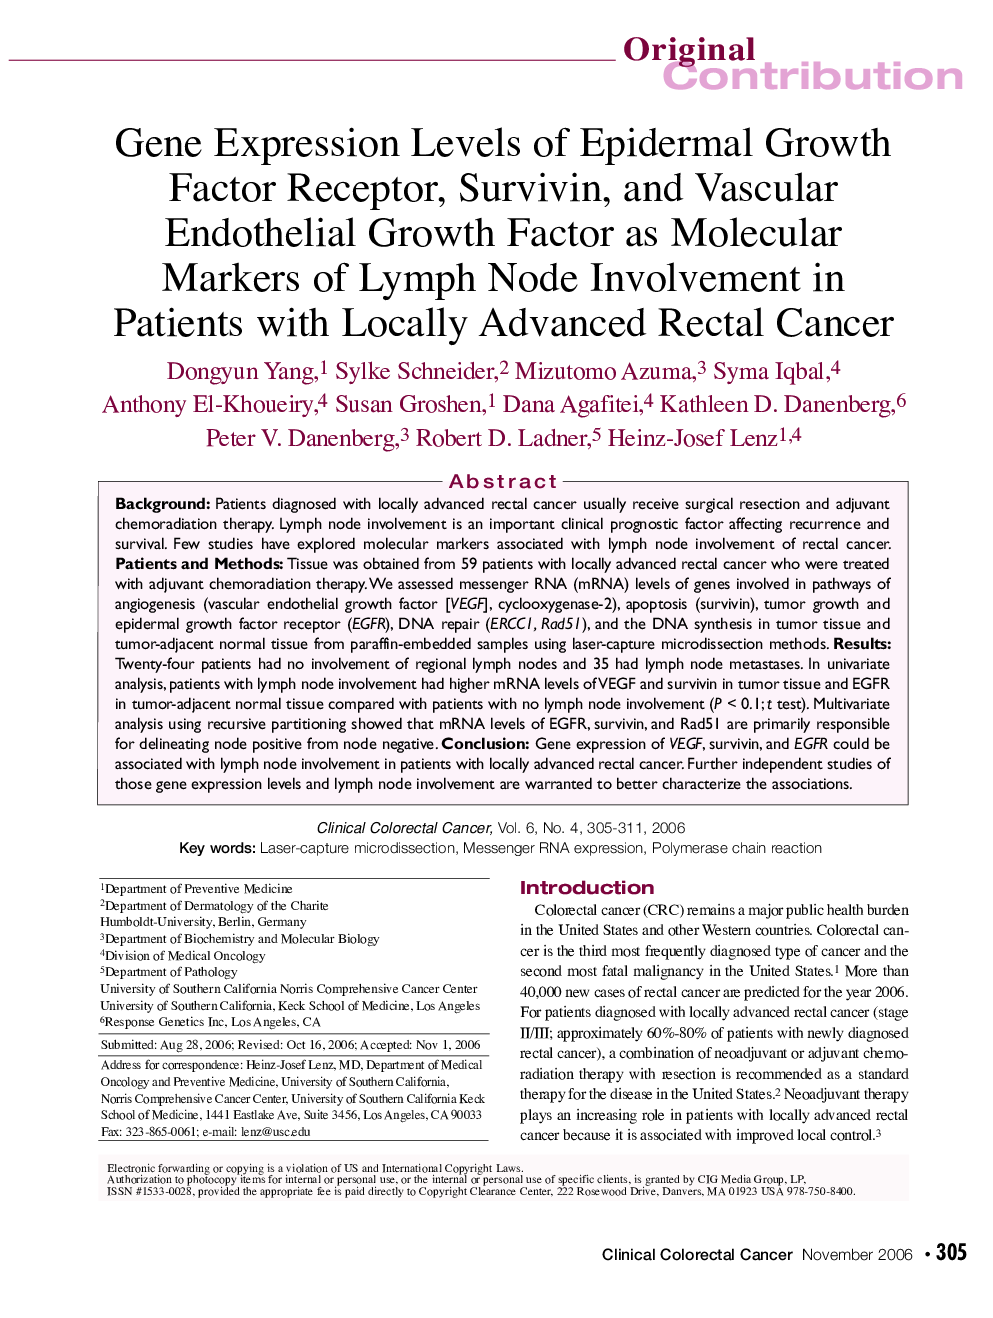 Gene Expression Levels of Epidermal Growth Factor Receptor, Survivin, and Vascular Endothelial Growth Factor as Molecular Markers of Lymph Node Involvement in Patients with Locally Advanced Rectal Cancer